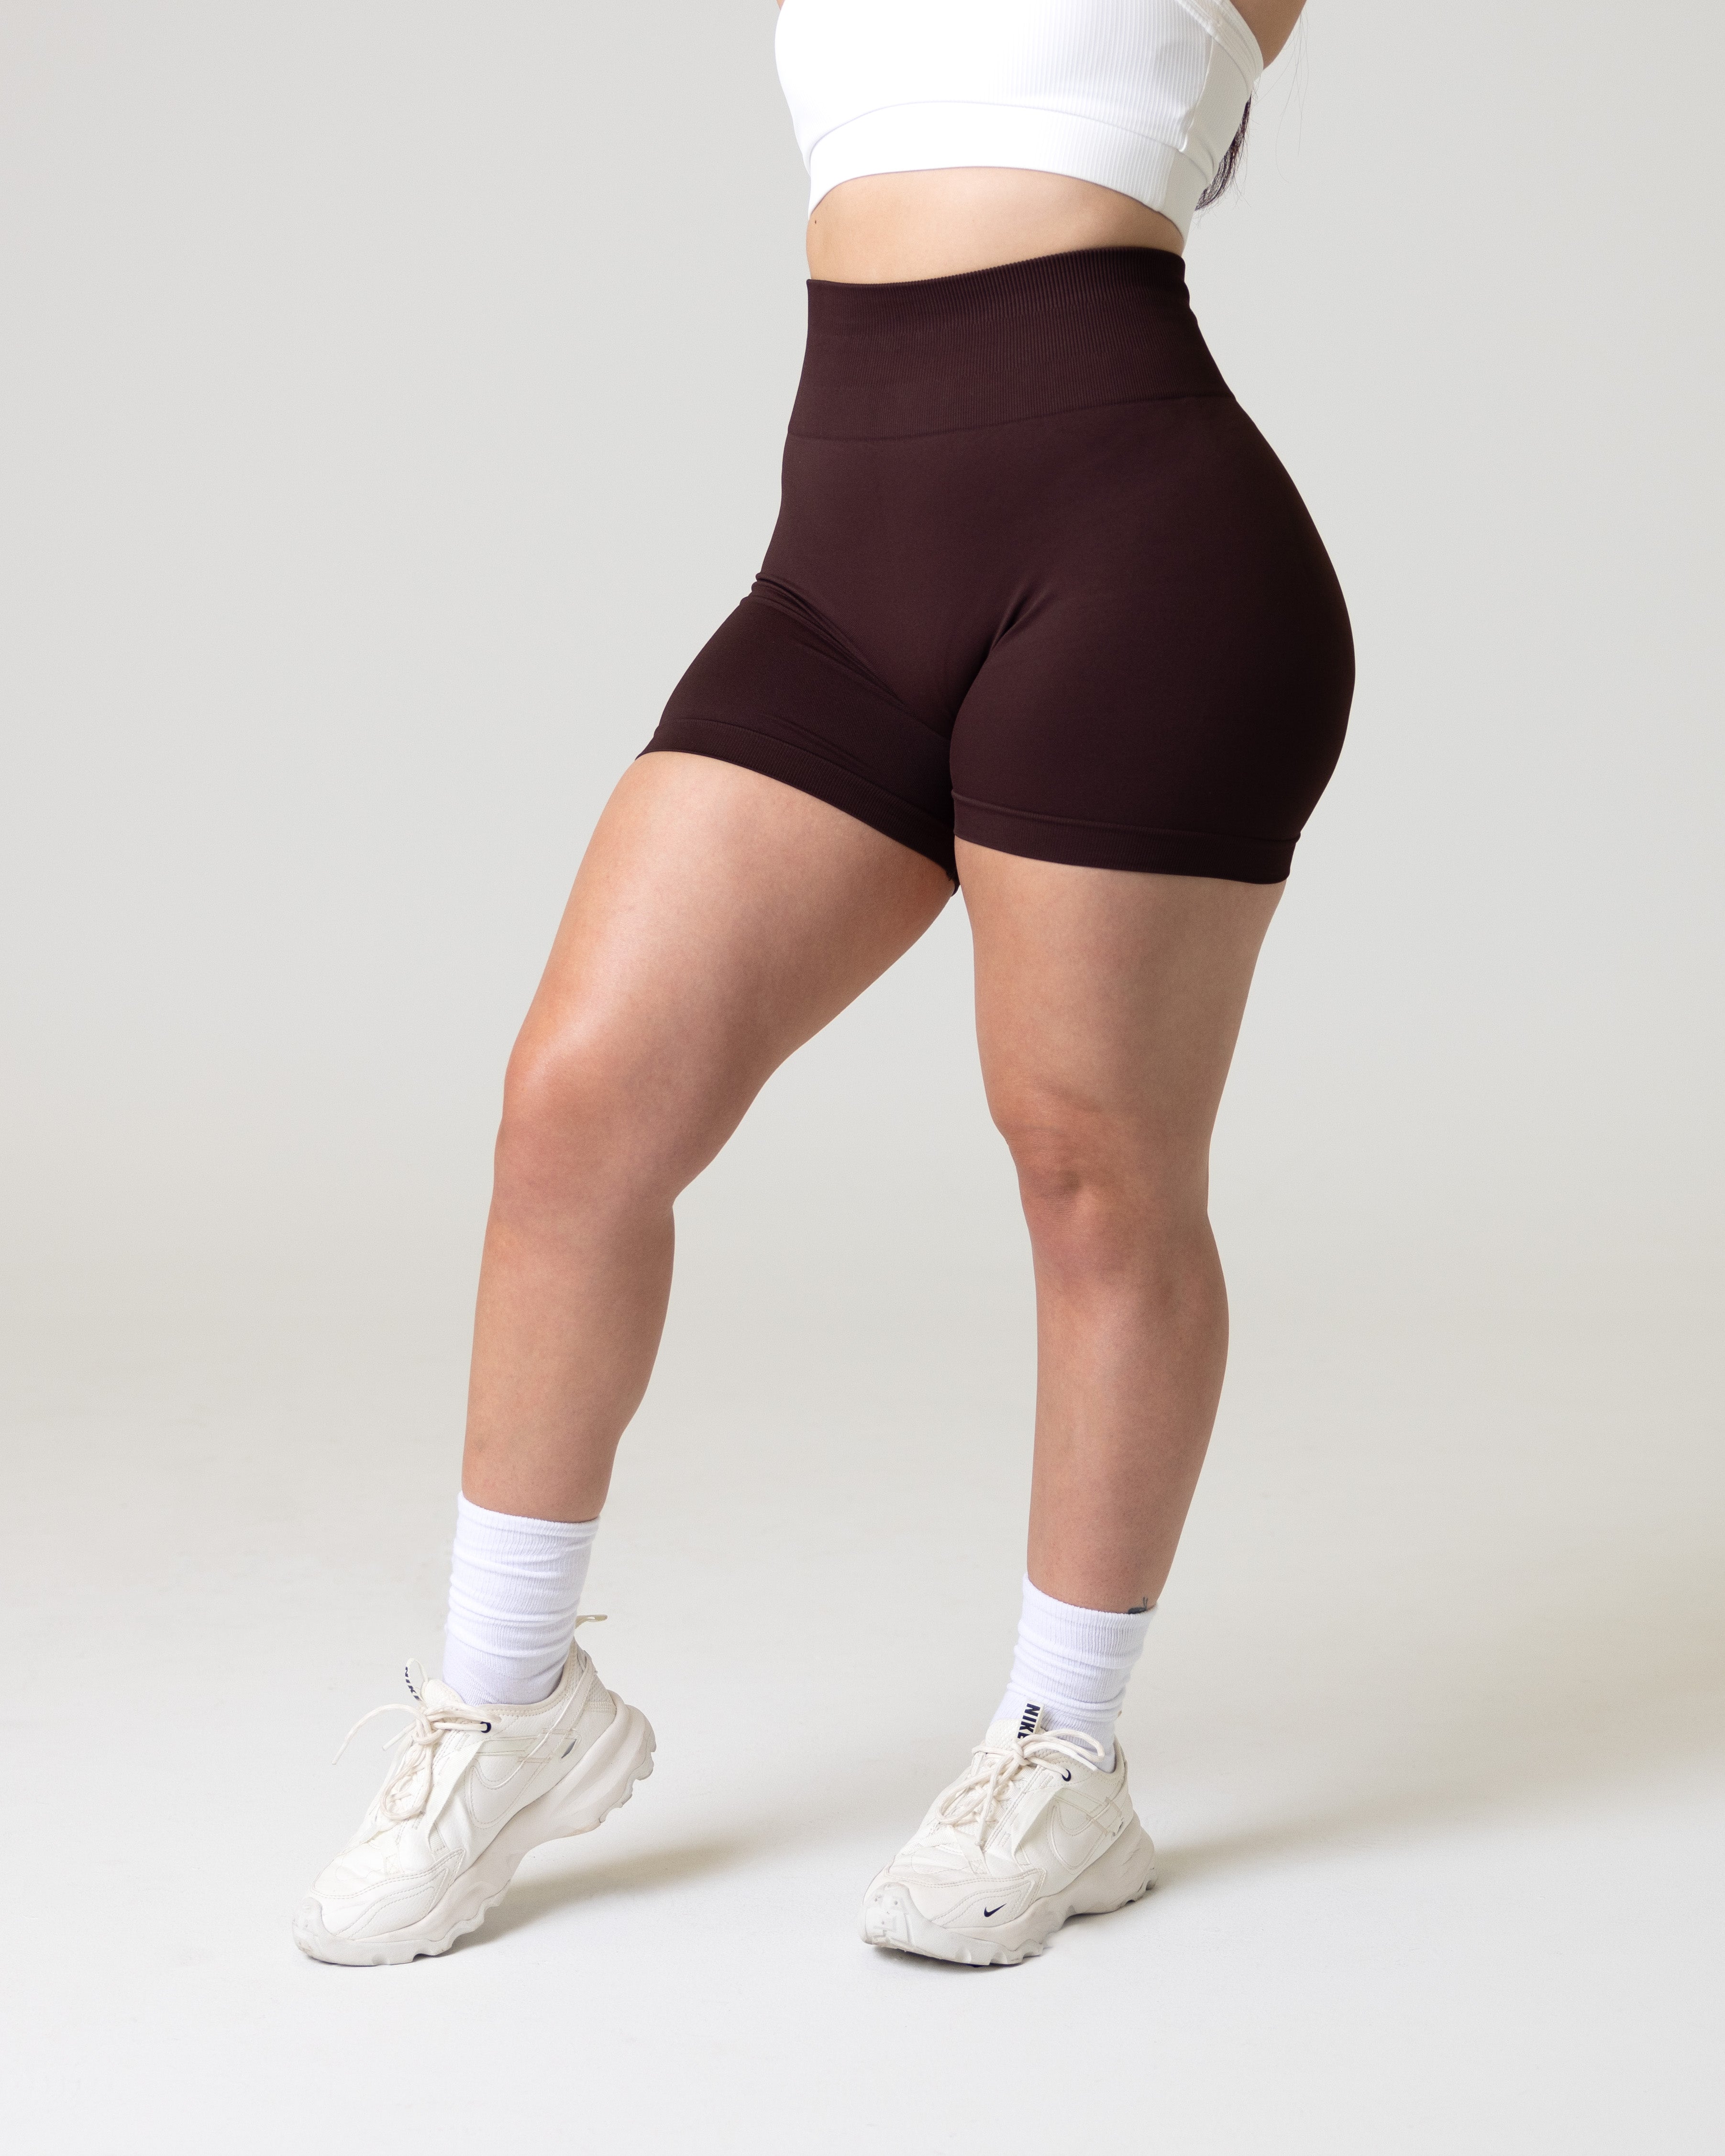 ✨ Elevate your curves with our STA0322 High Waistline Shorts